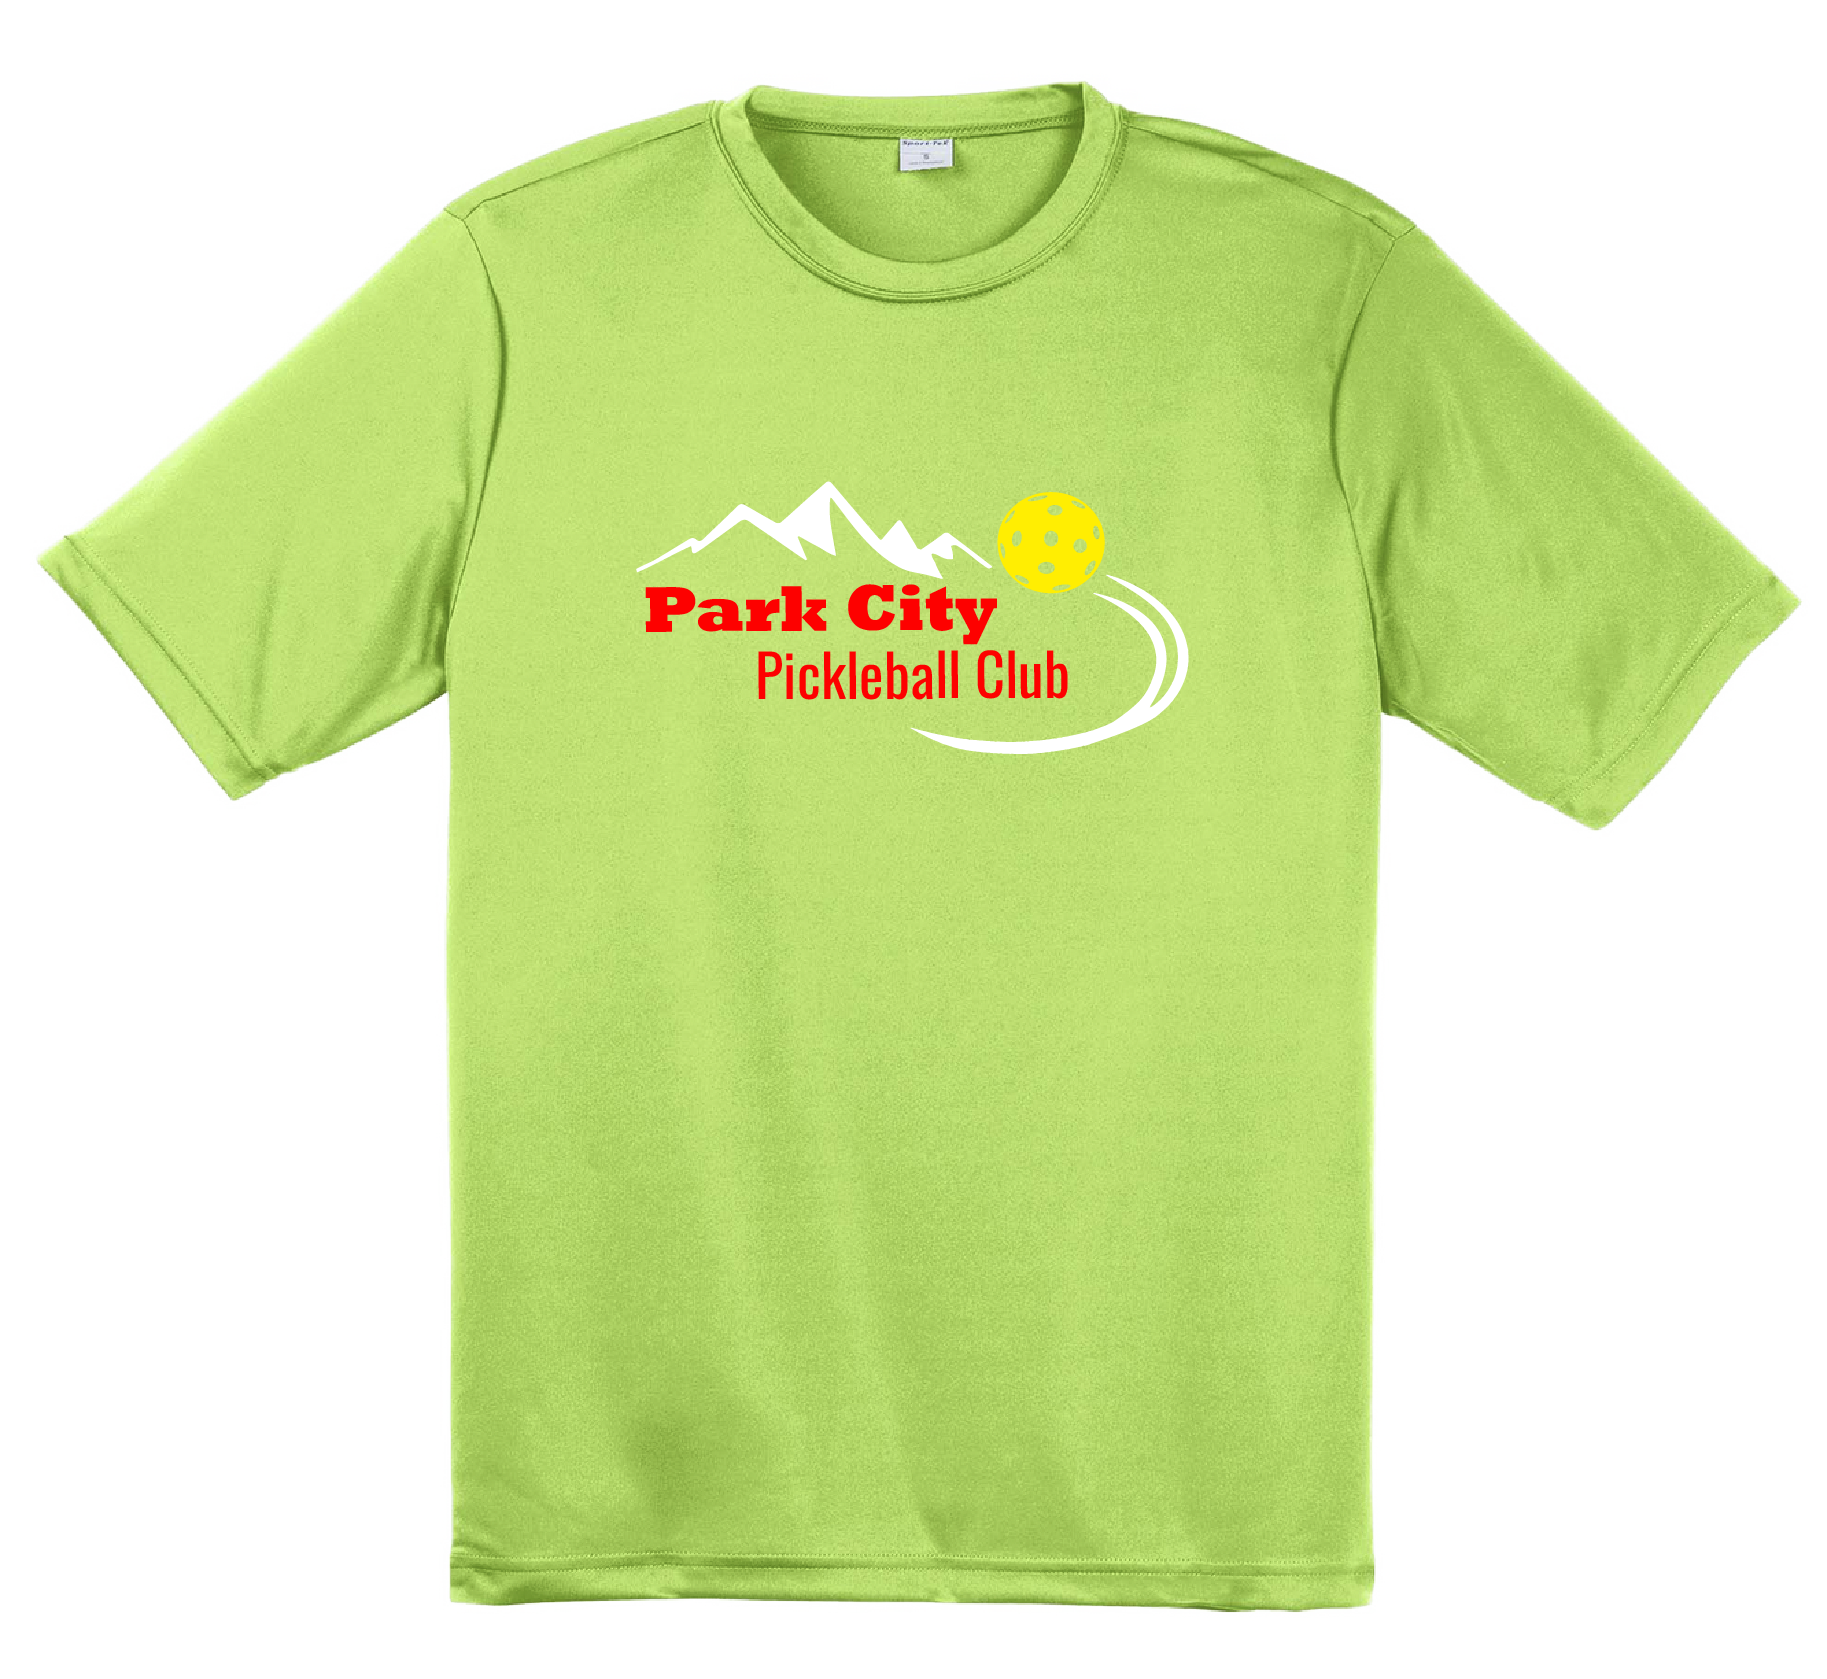 Pickleball Design: Park City Pickleball Club (red words)  Men's Style: Short Sleeved   Shirts are lightweight, roomy and highly breathable. These moisture-wicking shirts are designed for athletic performance. They feature PosiCharge technology to lock in color and prevent logos from fading. Removable tag and set-in sleeves for comfort.